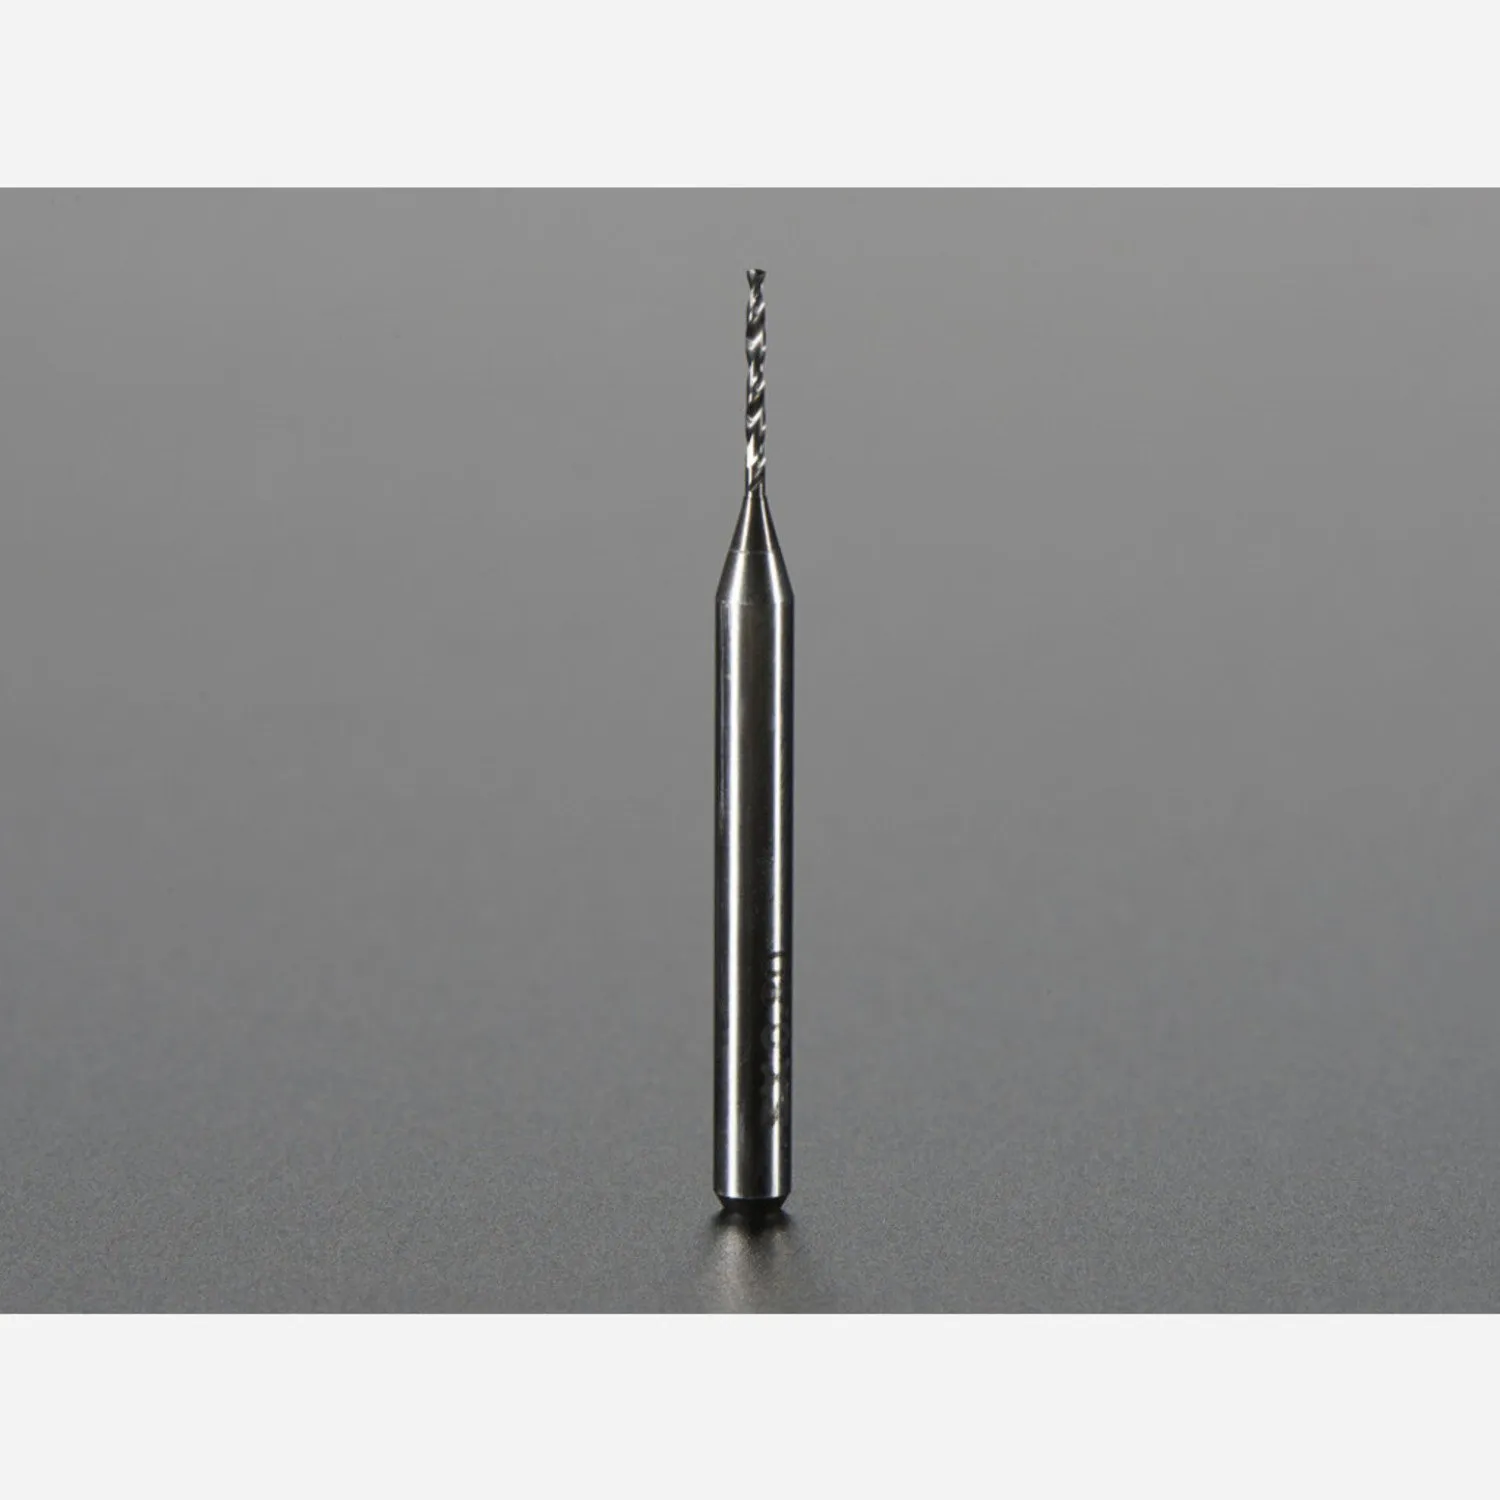 Photo of Carbide Square End Mill - 1/8 Shaft - 0.8mm Diameter